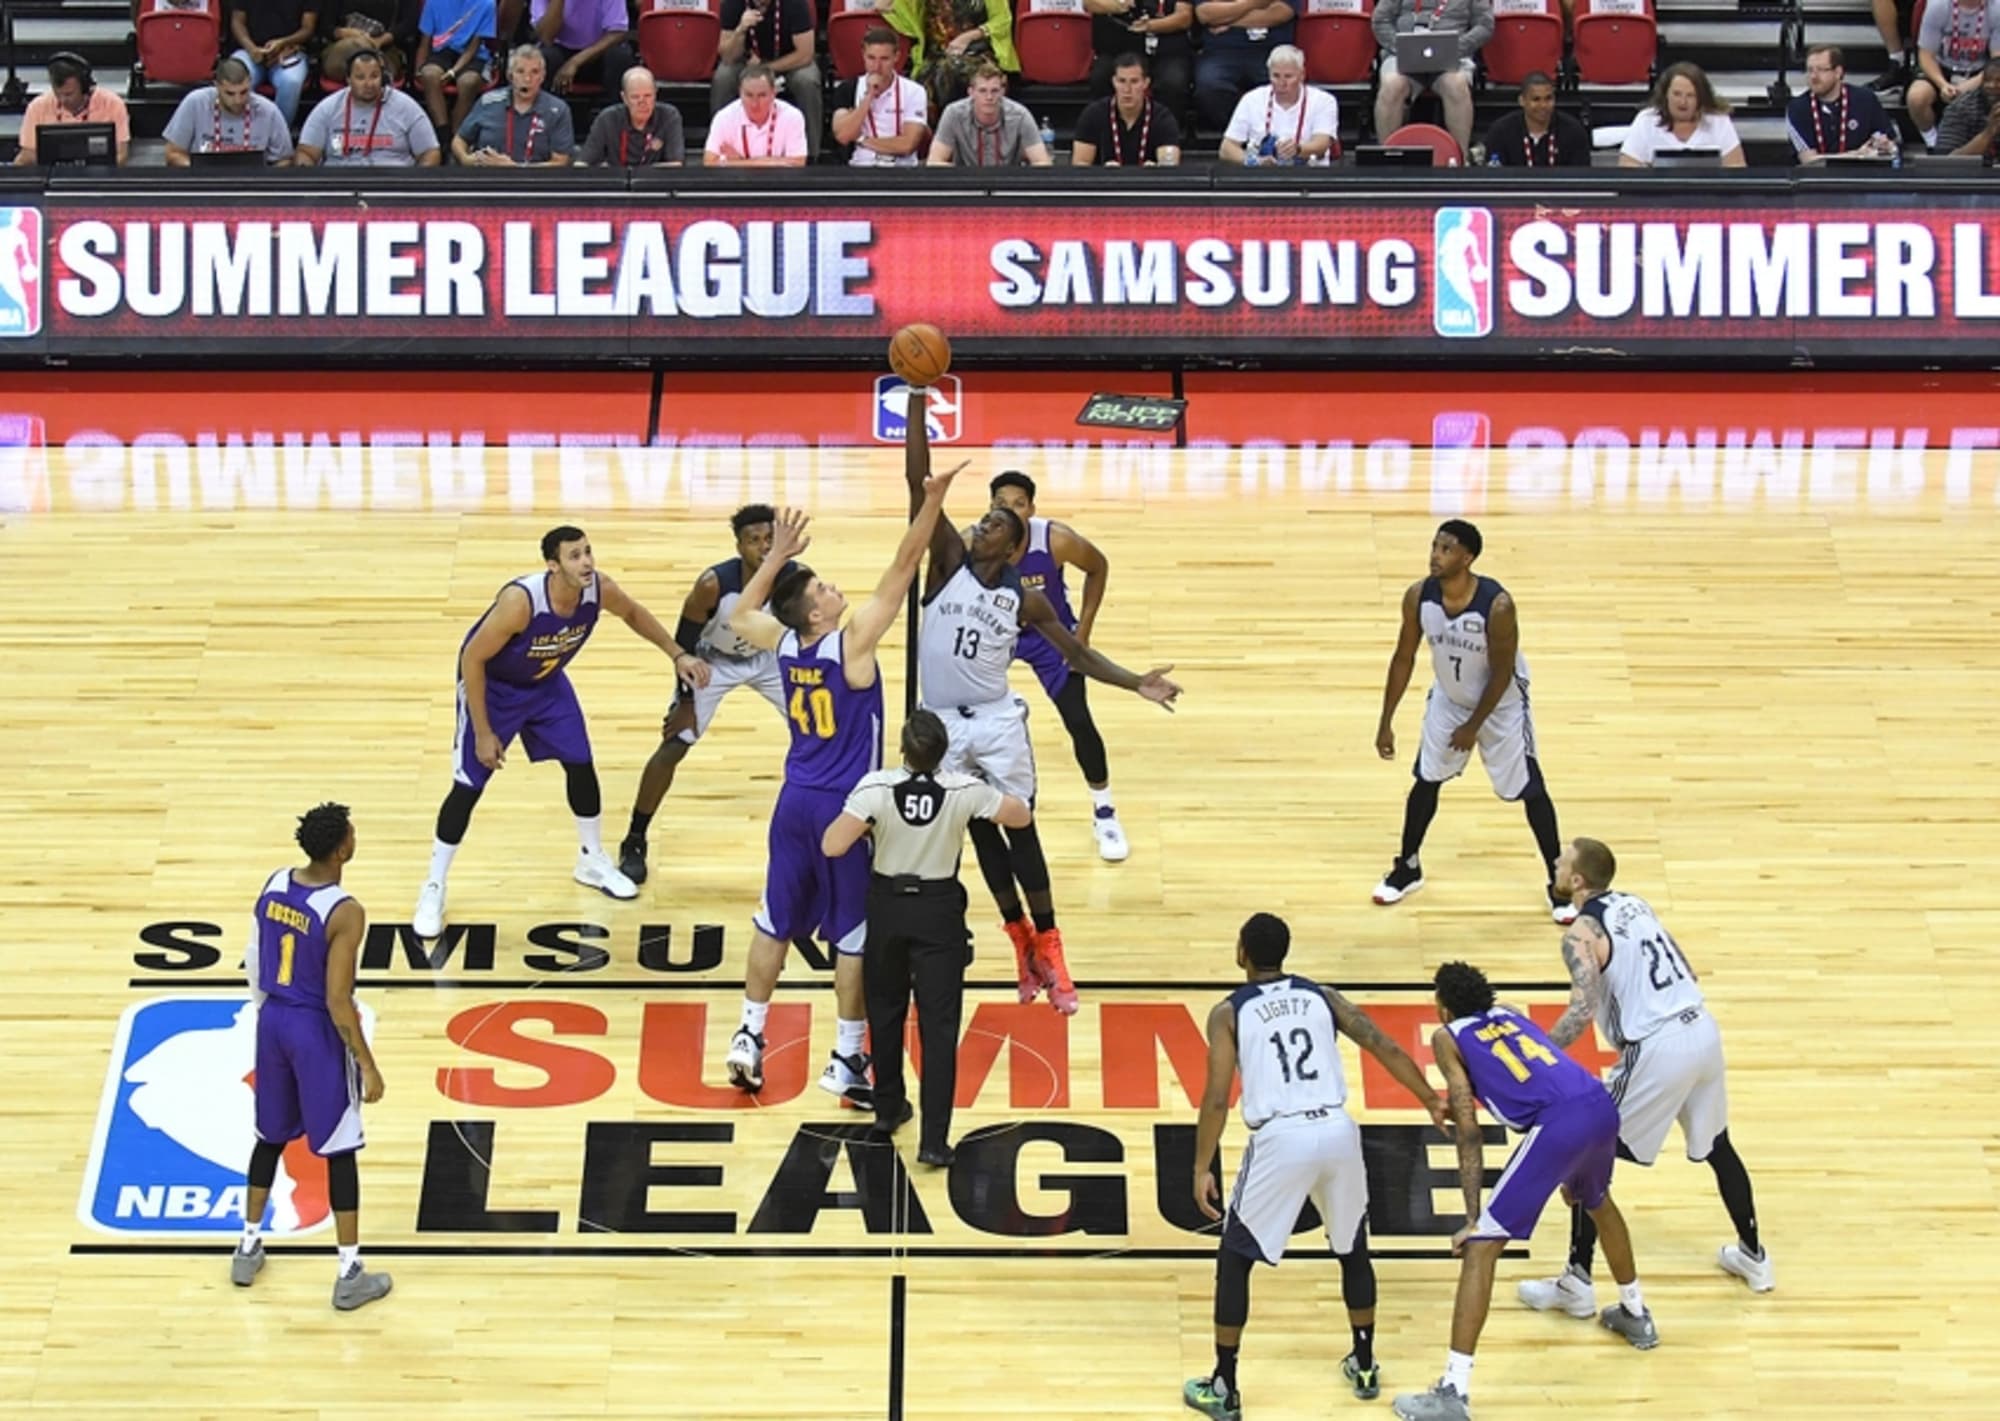 How the Lakers Summer League Affects the Regular Season